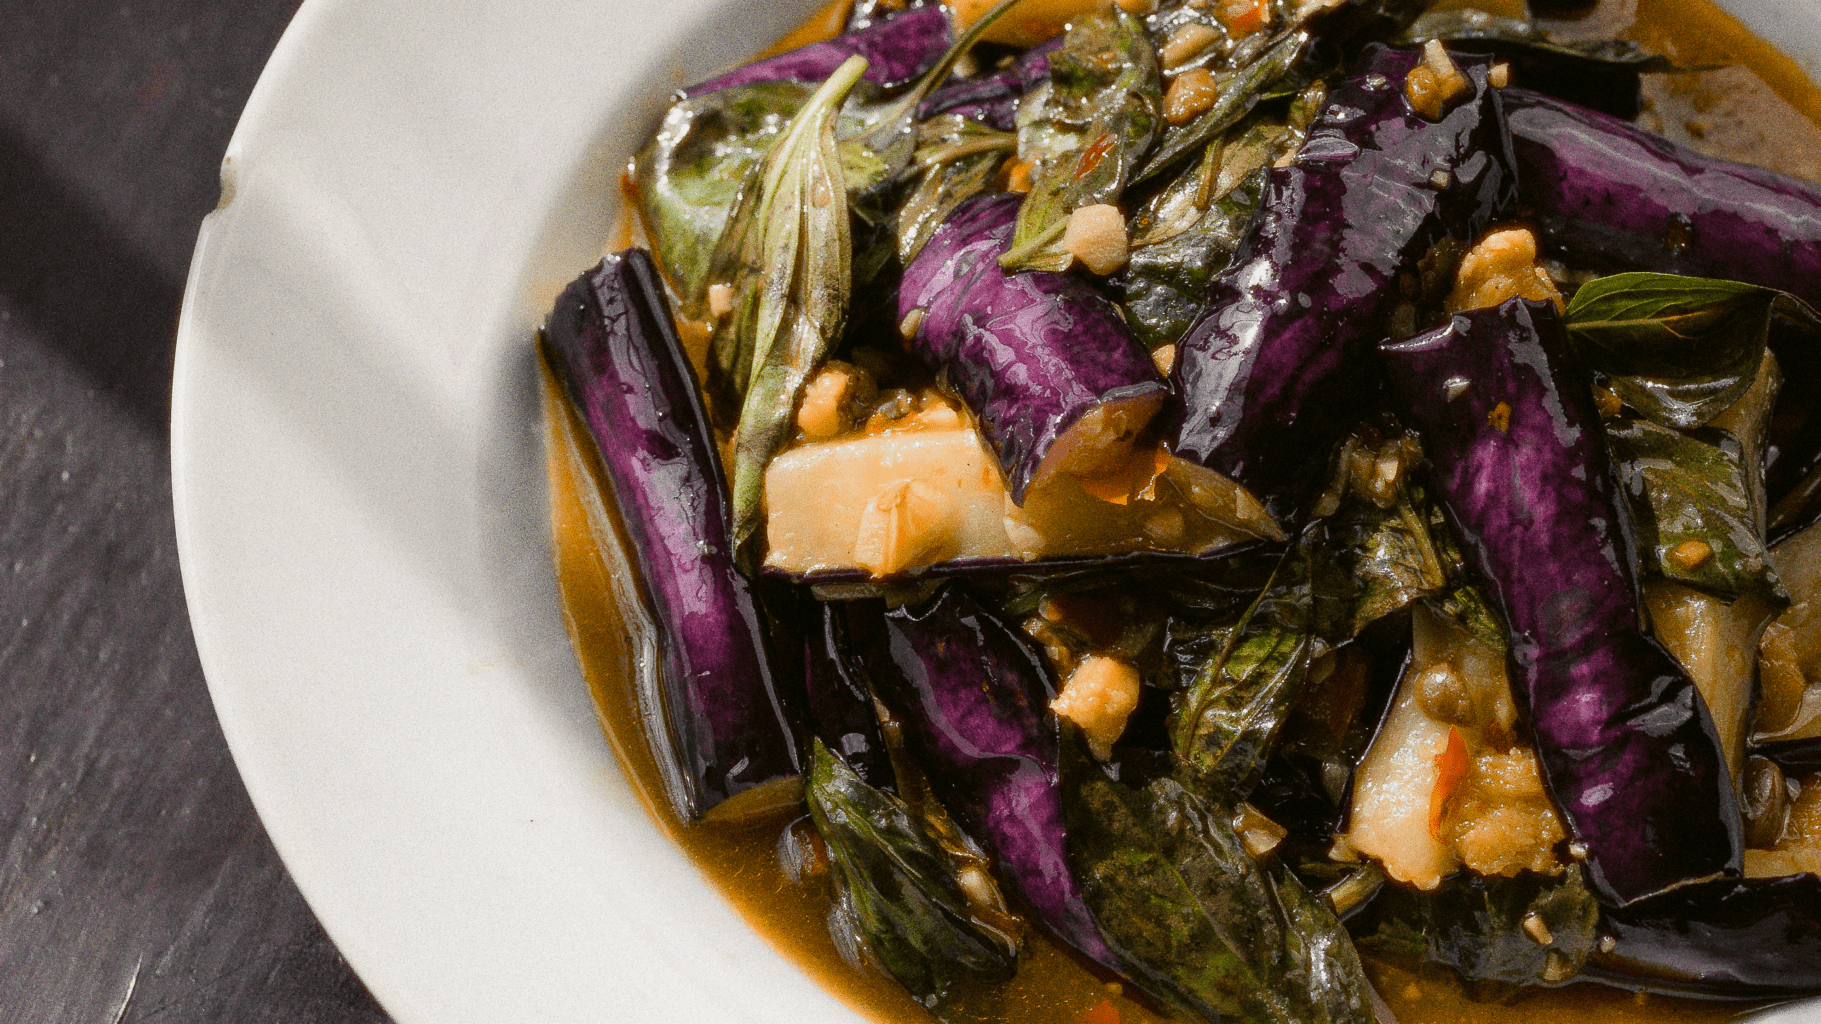 Basil-Fragrant Eggplant excerpted from A-Gong’s Table by George Lee.